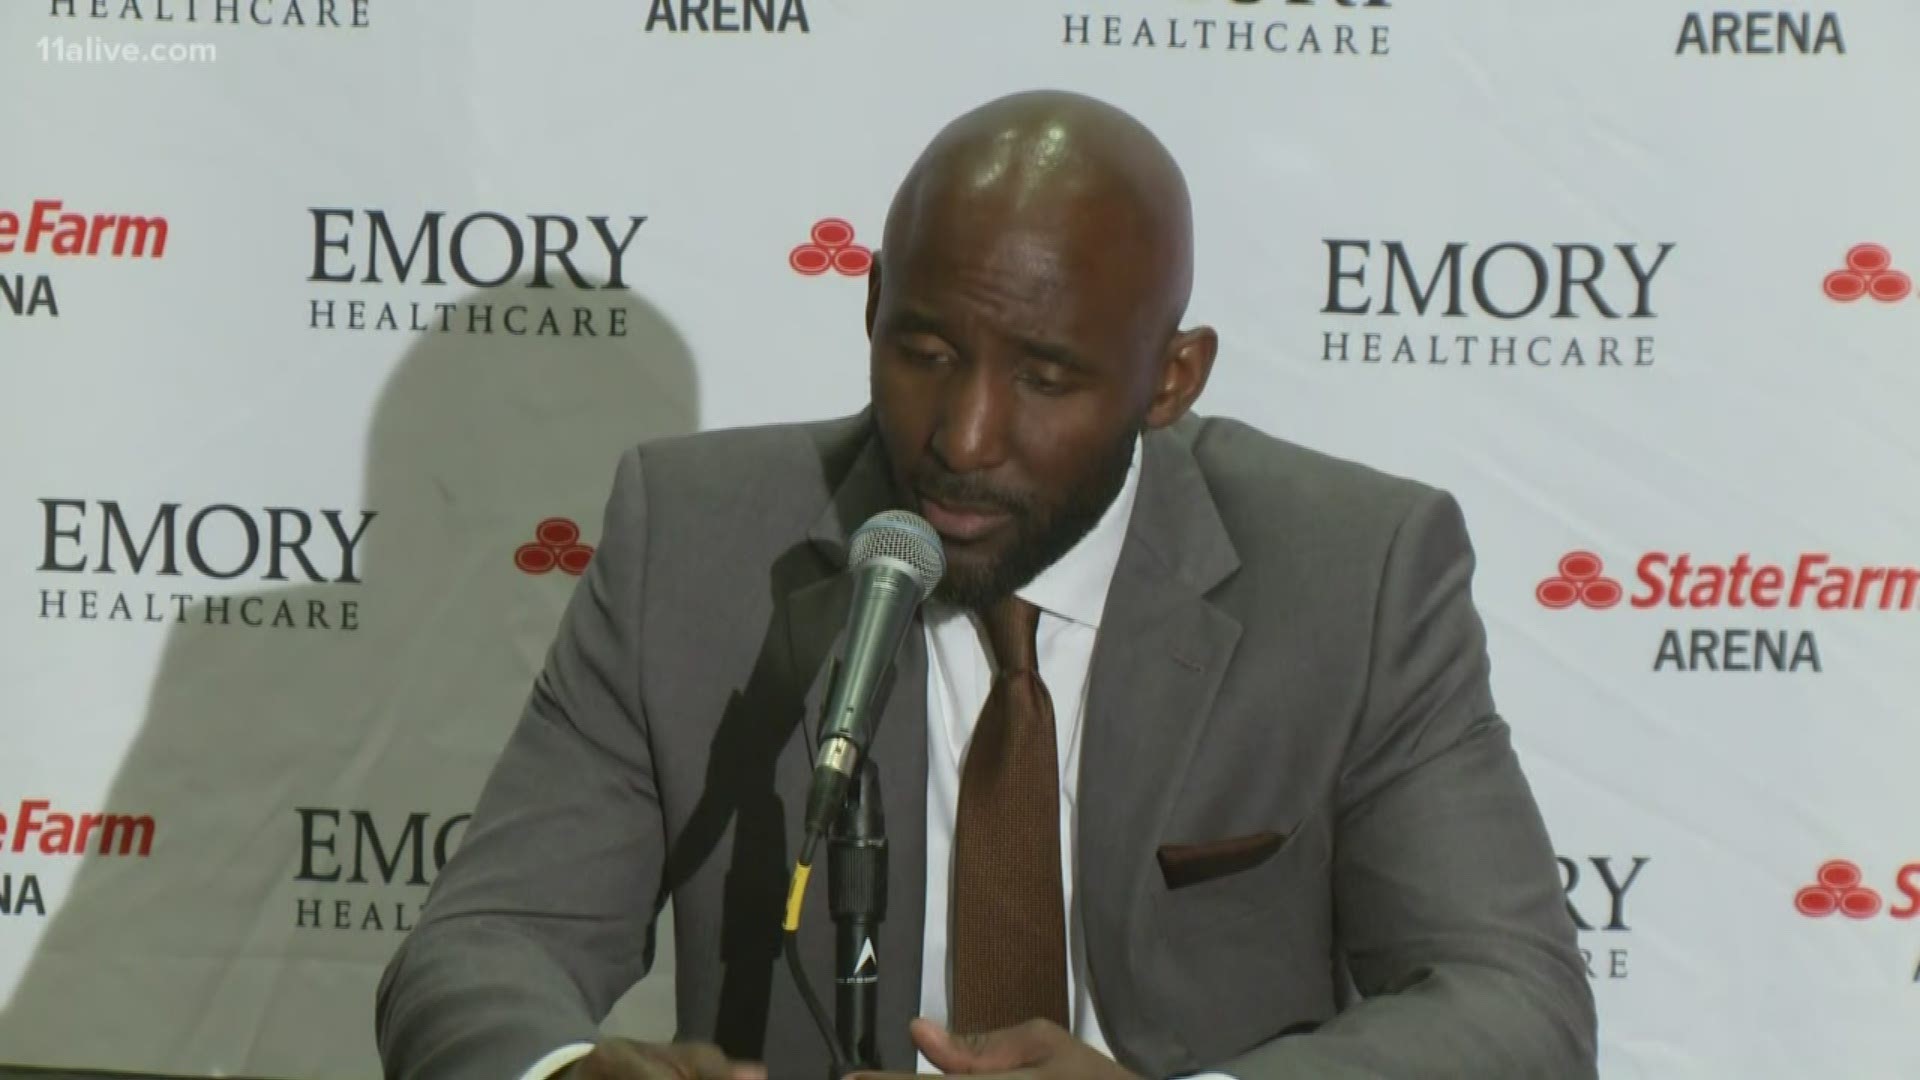 The Atlanta Hawks head coach spoke on what it was like for him and for players taking the court after Kobe Bryant's death along with his daughter and 7 others.